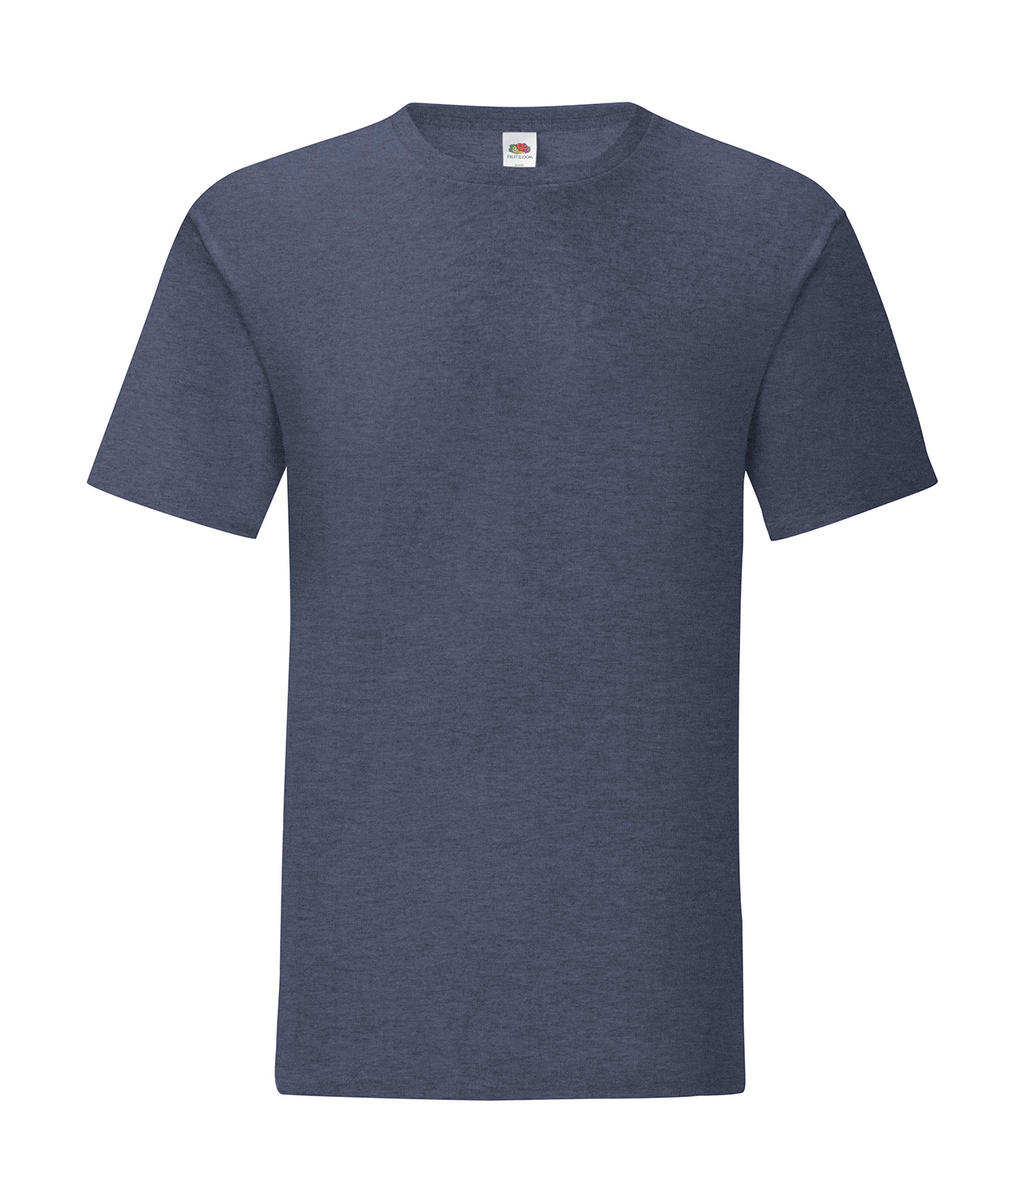  Iconic 150 T in Farbe Heather Navy